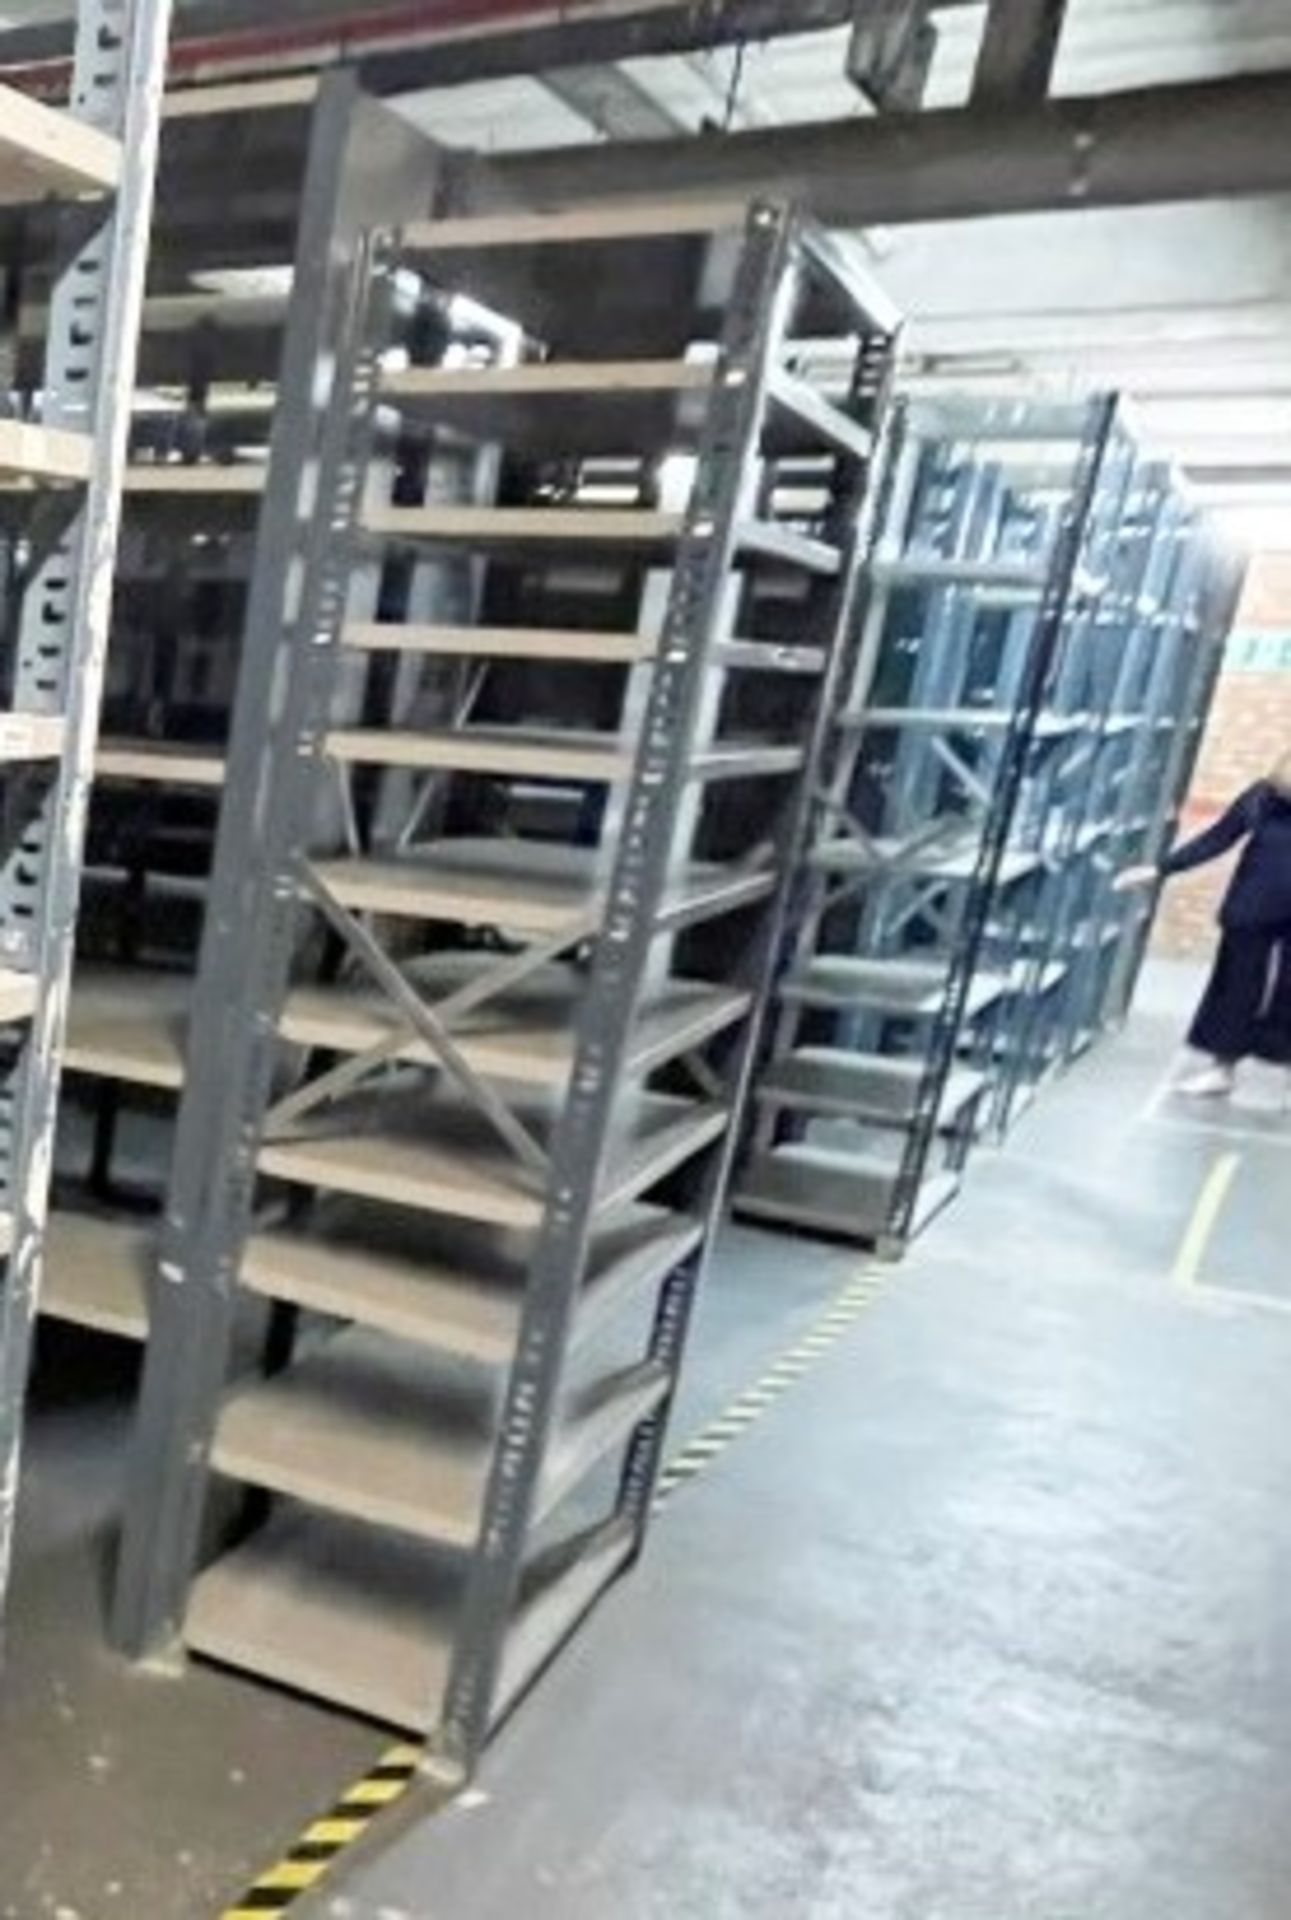 7 x Bays of Metal Warehouse Storage Shelving - H270 x W100 x D52 cms - 100cm Width Per Bay - CL670 - - Image 2 of 2